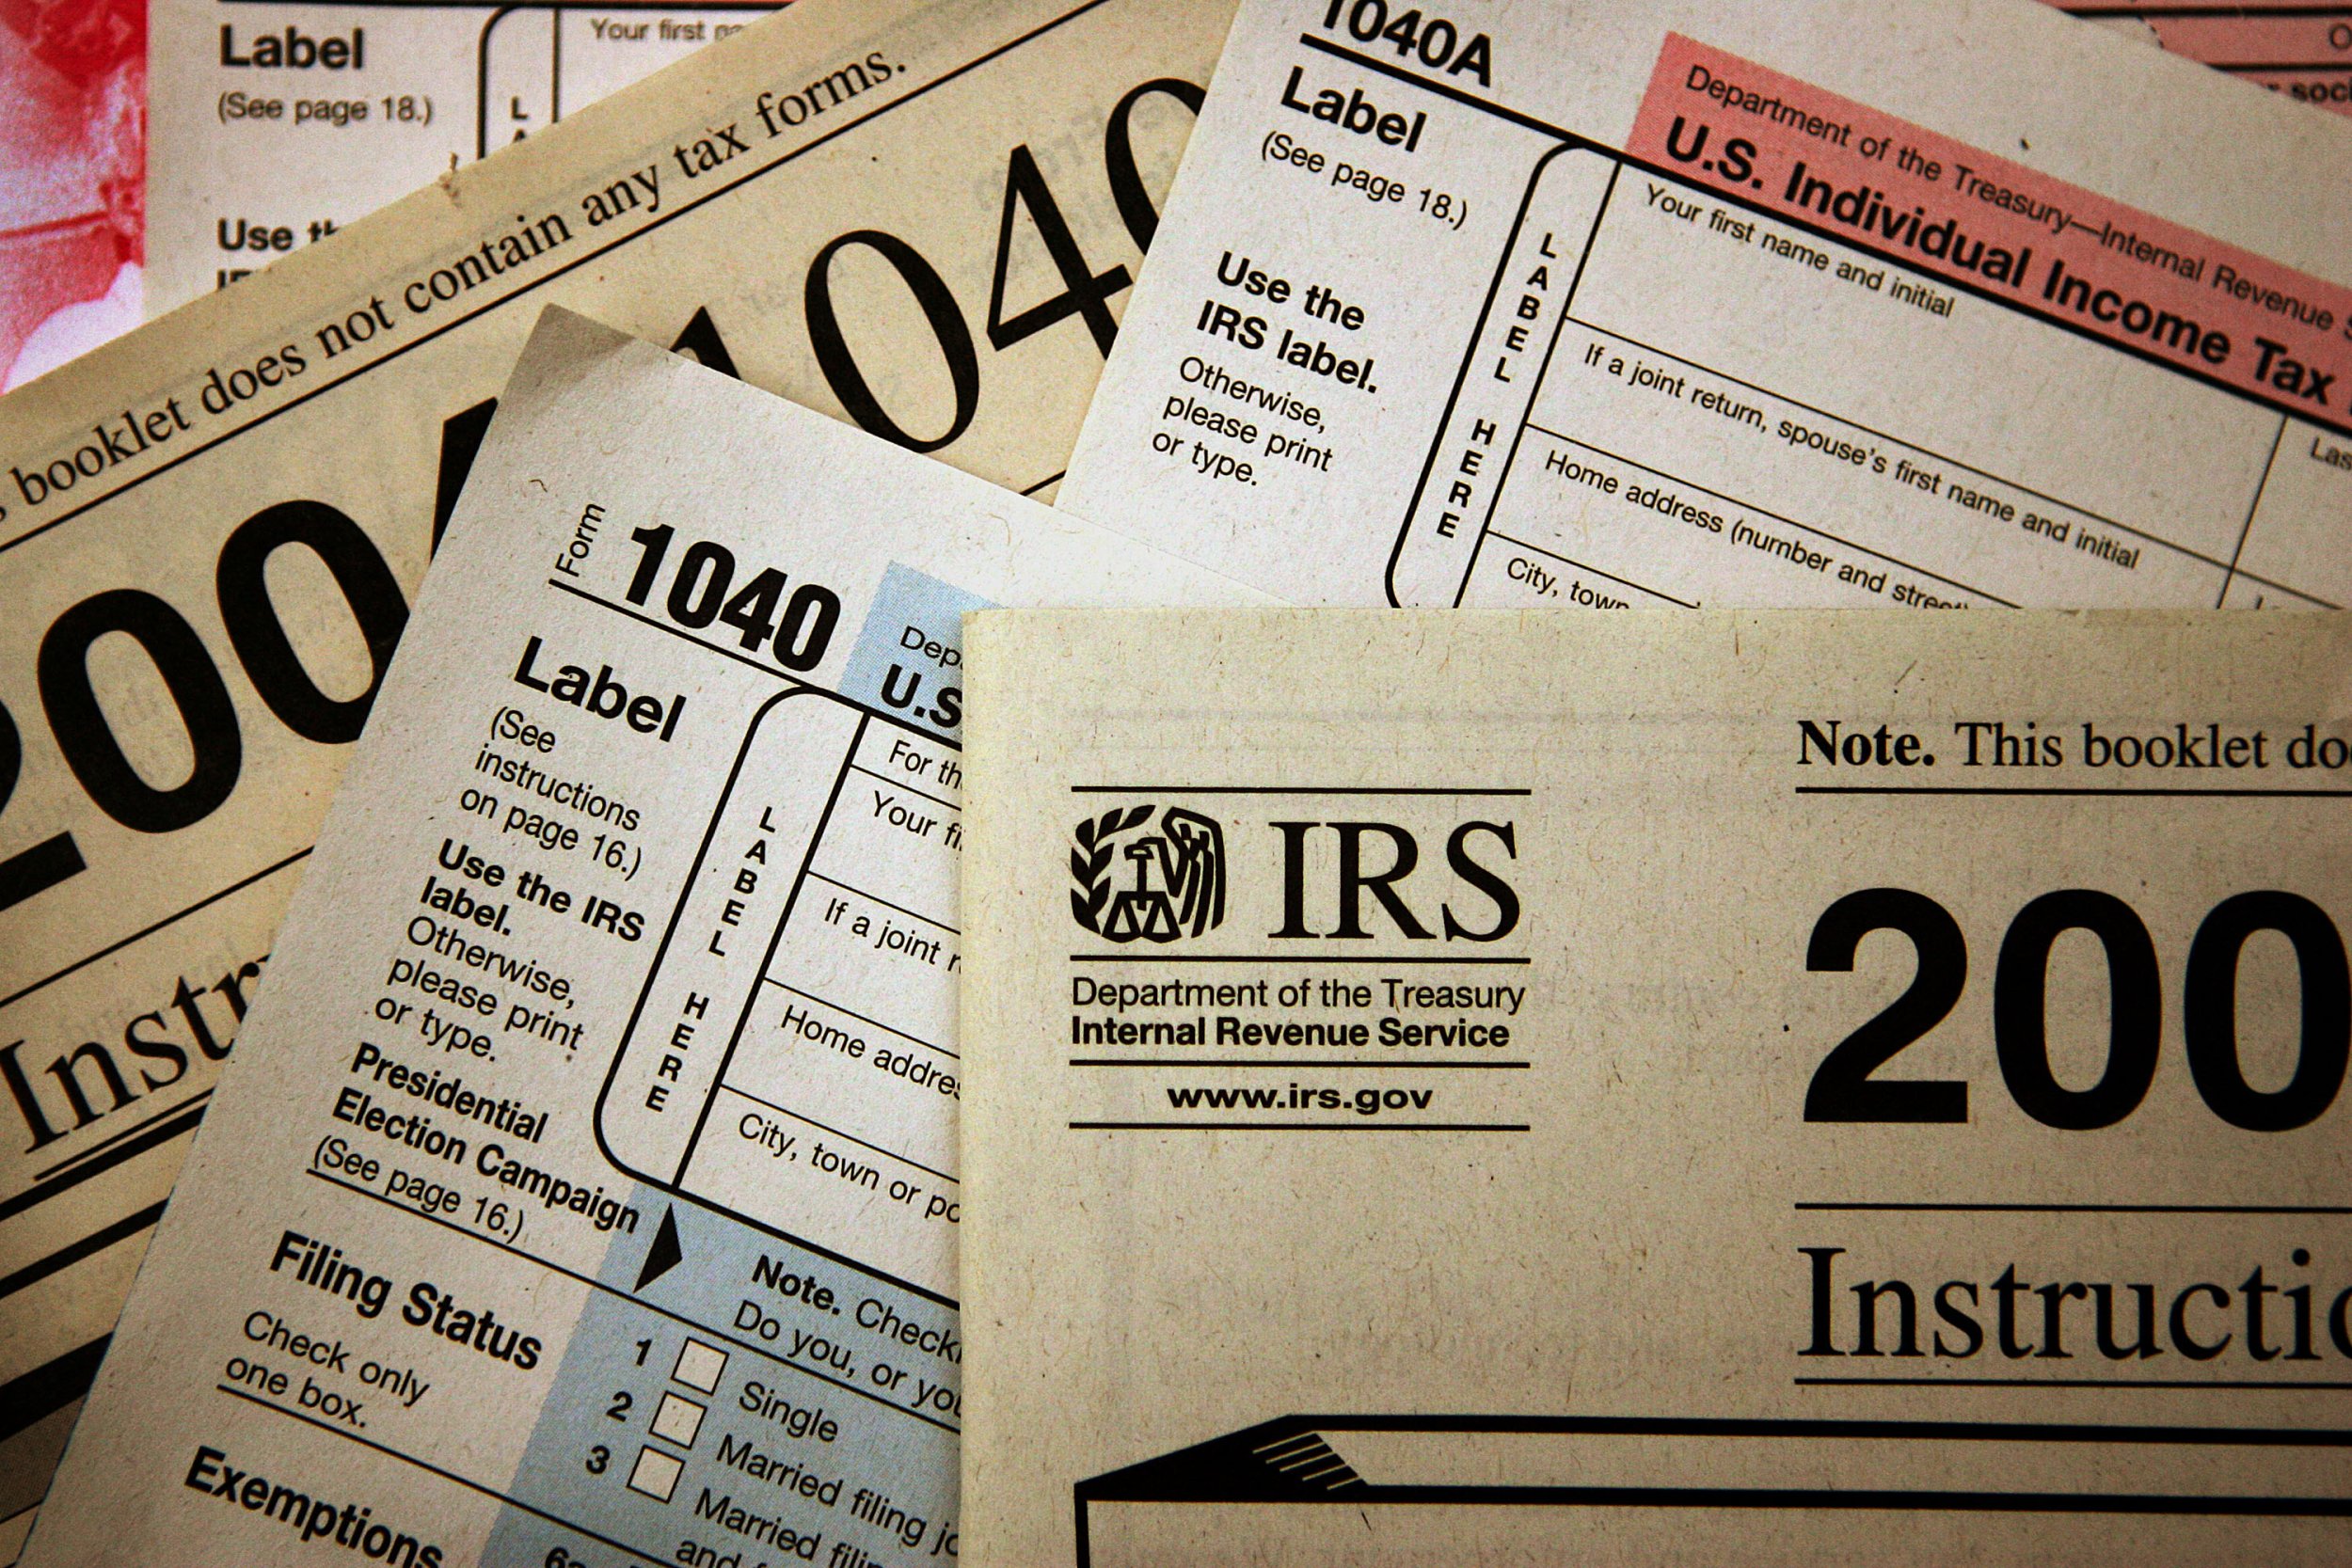 Tax Laws Can You Take The Fifth With The IRS? IBTimes